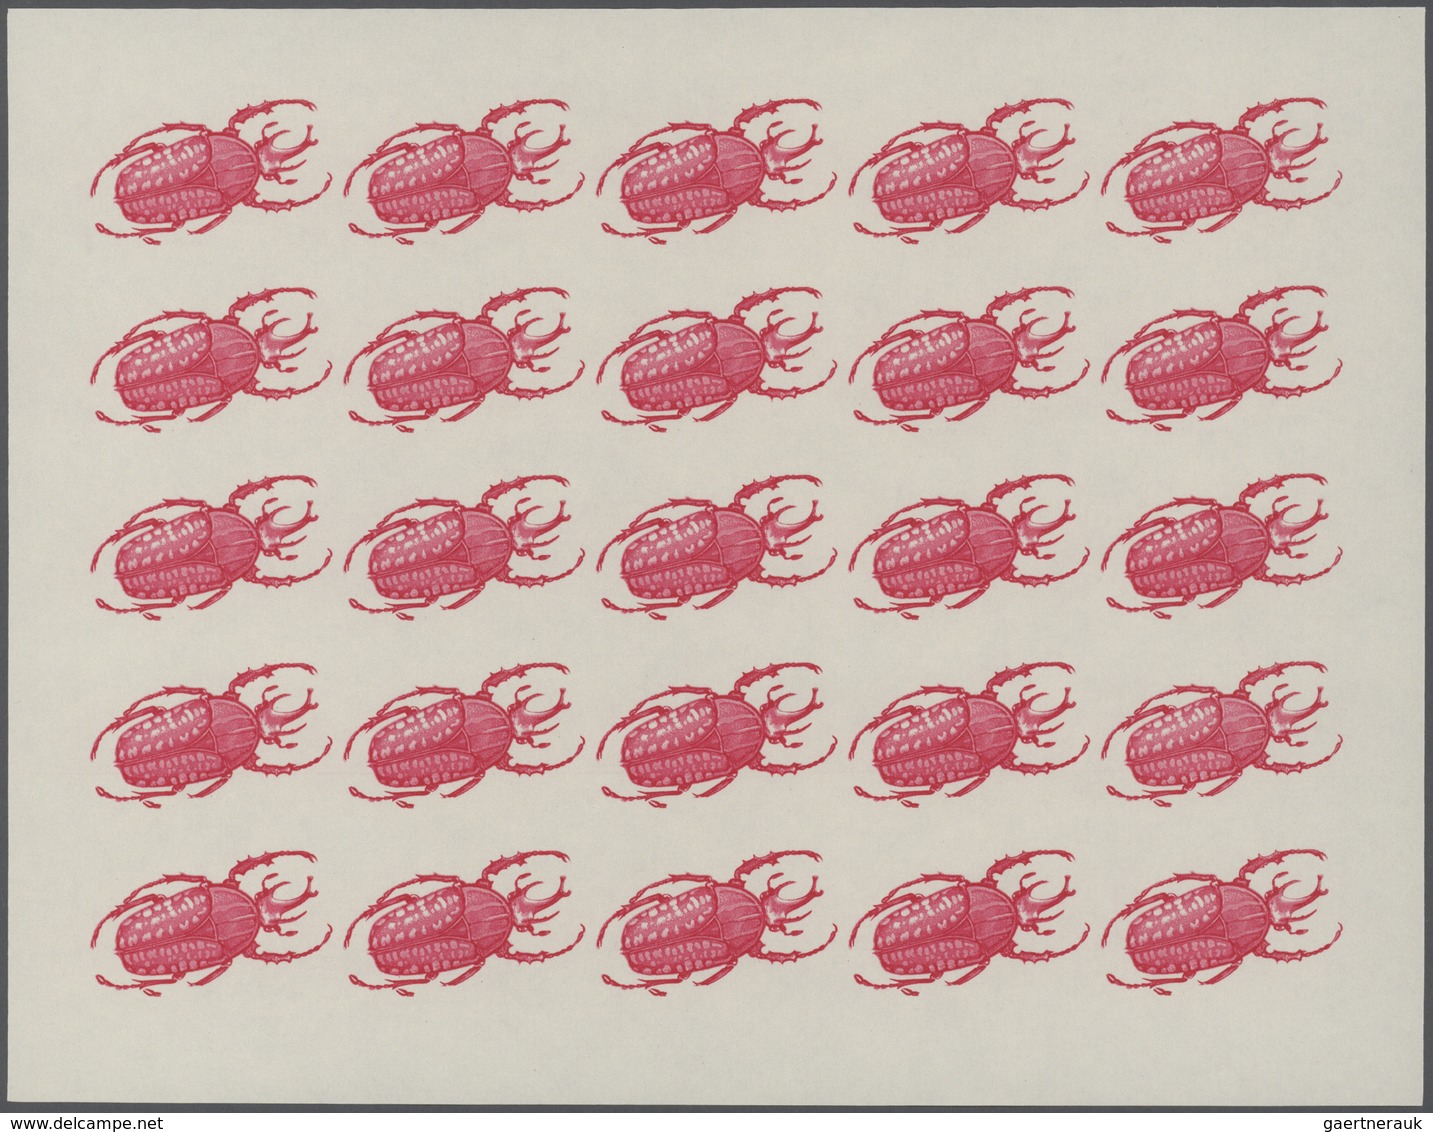 25722 Thematik: Tiere-Insekten / animals-insects: 1970, Burundi. Progressive proofs set of sheets for the